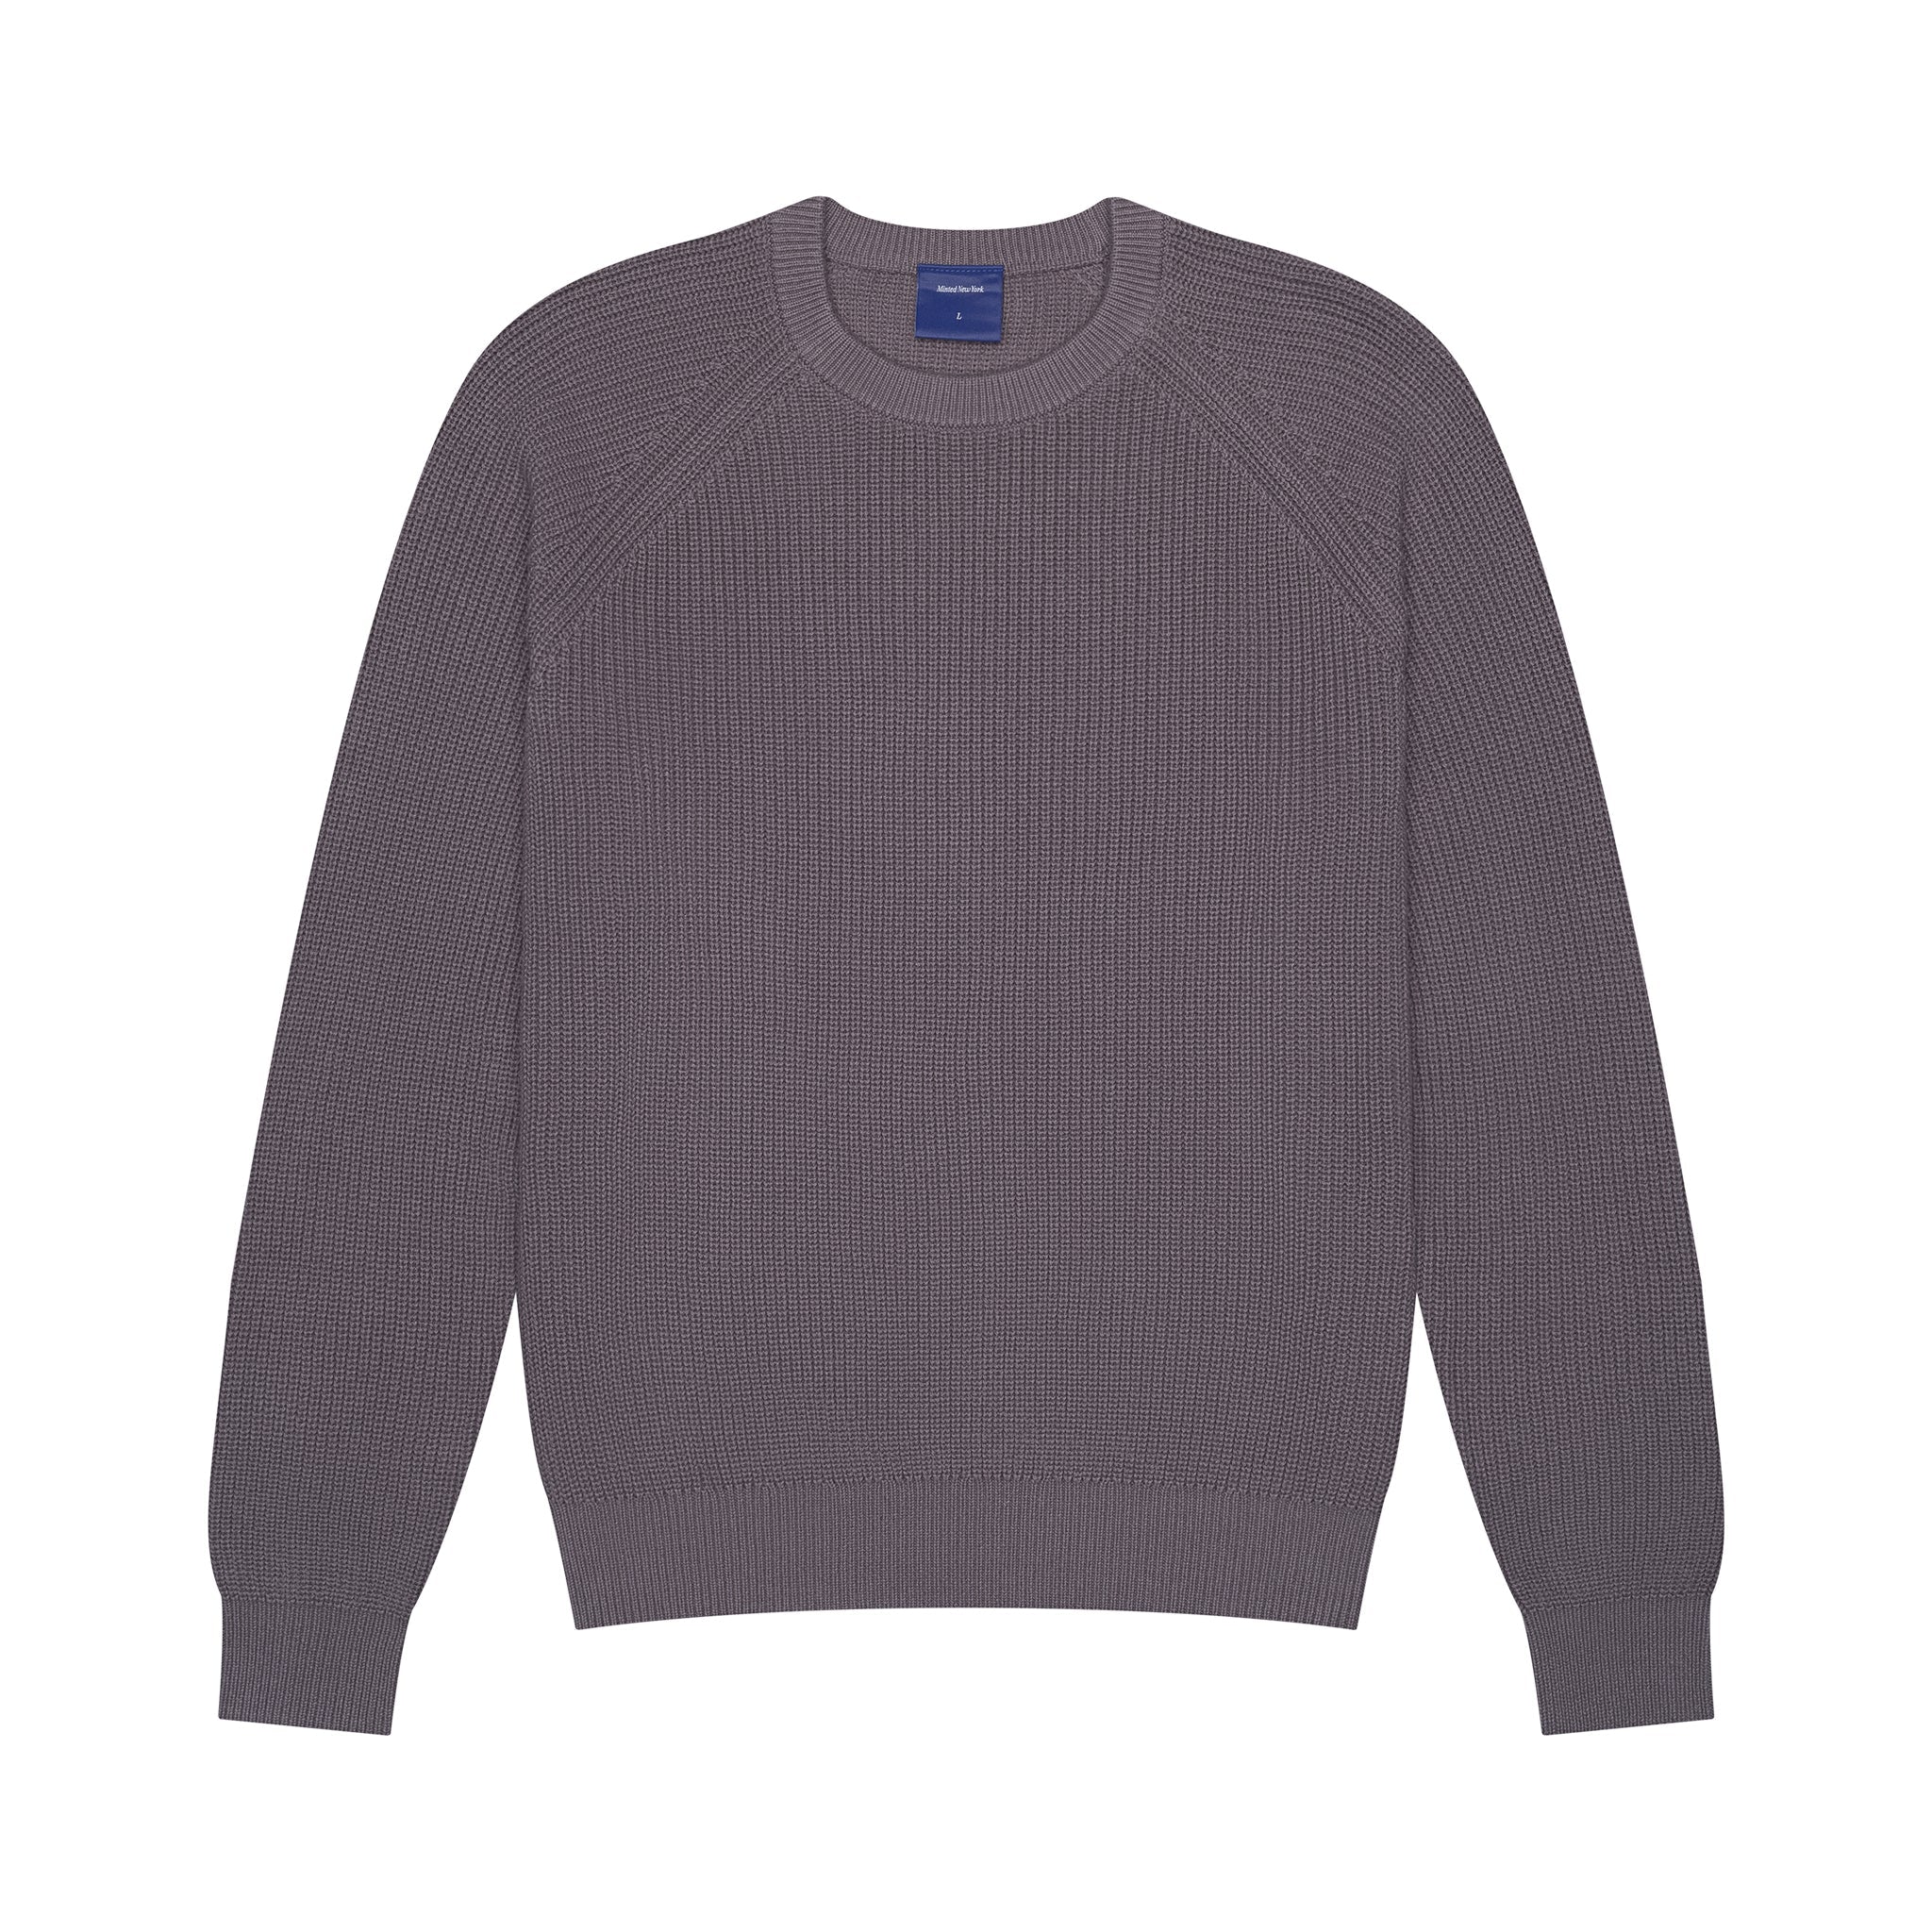 Knit Sweater - Minted New York